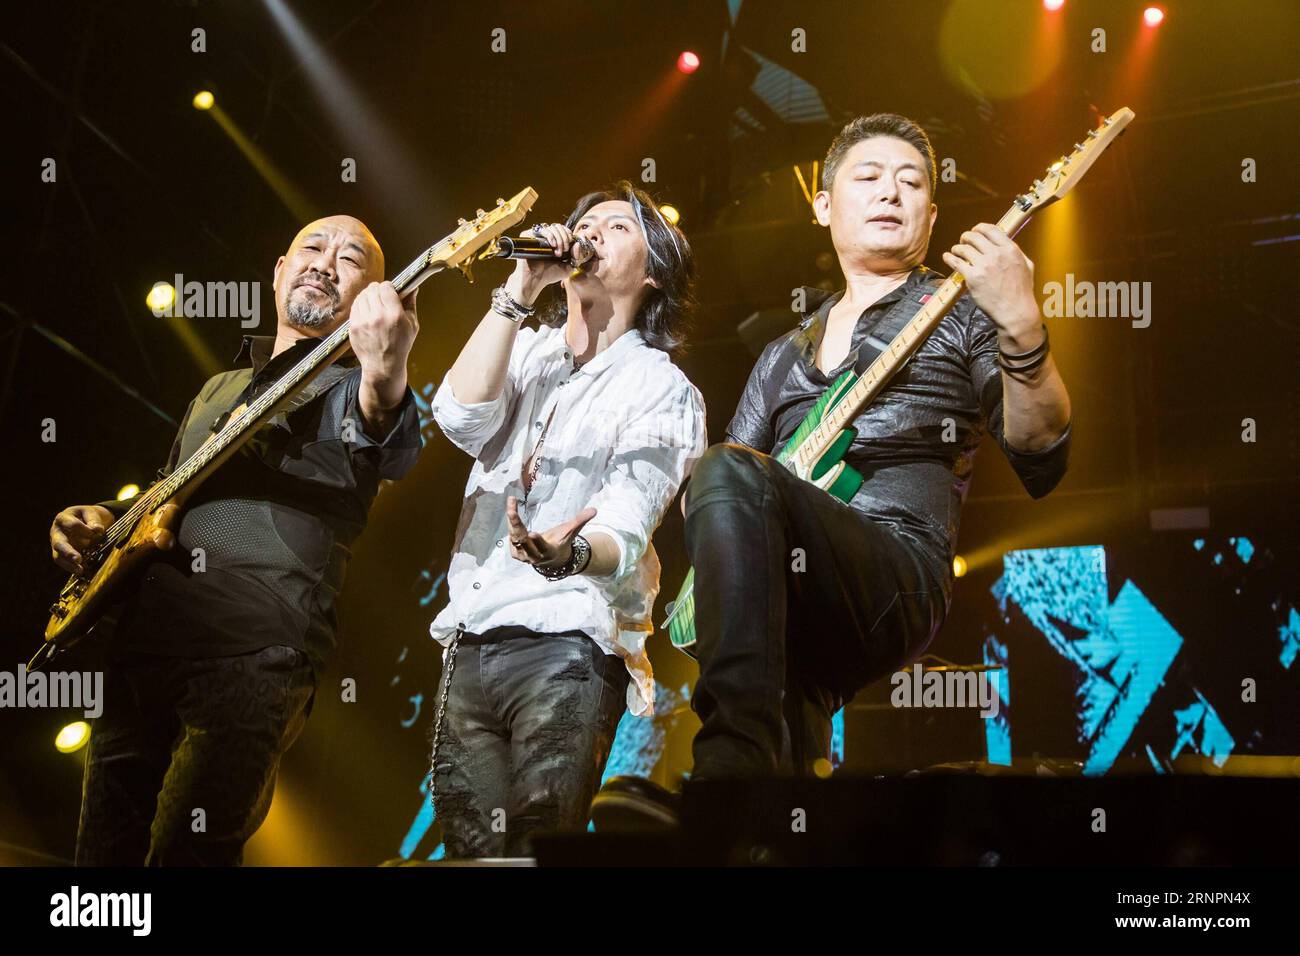 (170903) -- BEIJING, Sept. 3, 2017 -- Members of Chinese Rock n Roll band Black Panther perform during their concert True Color in Beijing, capital of China, Sept. 2, 2017. ) (lfj) CHINA-BEIJING-BLACK PANTHER BAND-CONCERT (CN) YanxMin PUBLICATIONxNOTxINxCHN   Beijing Sept 3 2017 Members of Chinese Rock n Roll Tie Black Panther perform during their Concert True Color in Beijing Capital of China Sept 2 2017 lfj China Beijing Black Panther Tie Concert CN  PUBLICATIONxNOTxINxCHN Stock Photo